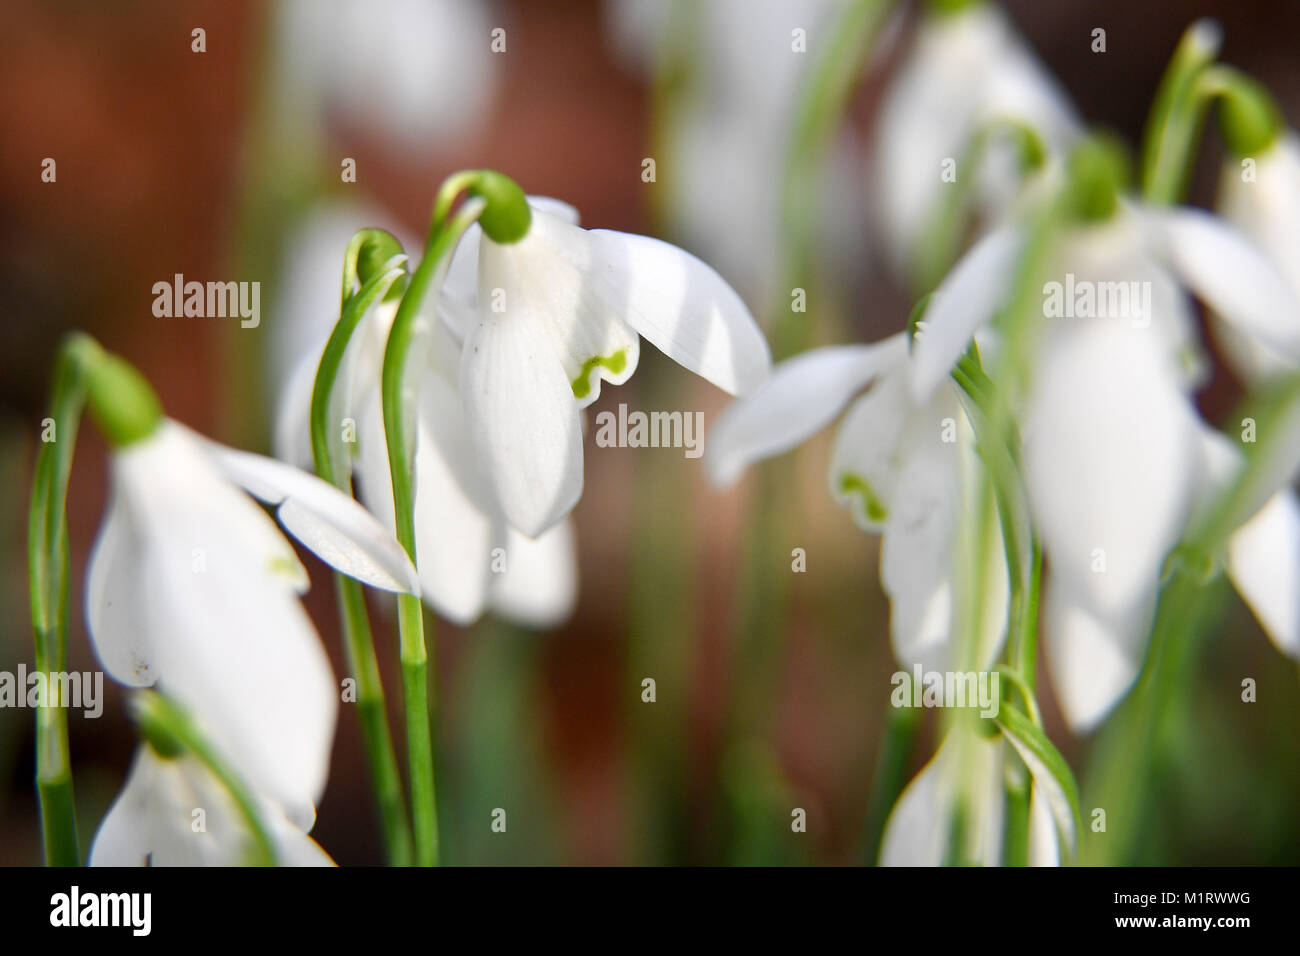 Snowdrops at Rococo Garden in Painswick, Gloucestershire, where the traditional winter flowers are in full bloom. Stock Photo